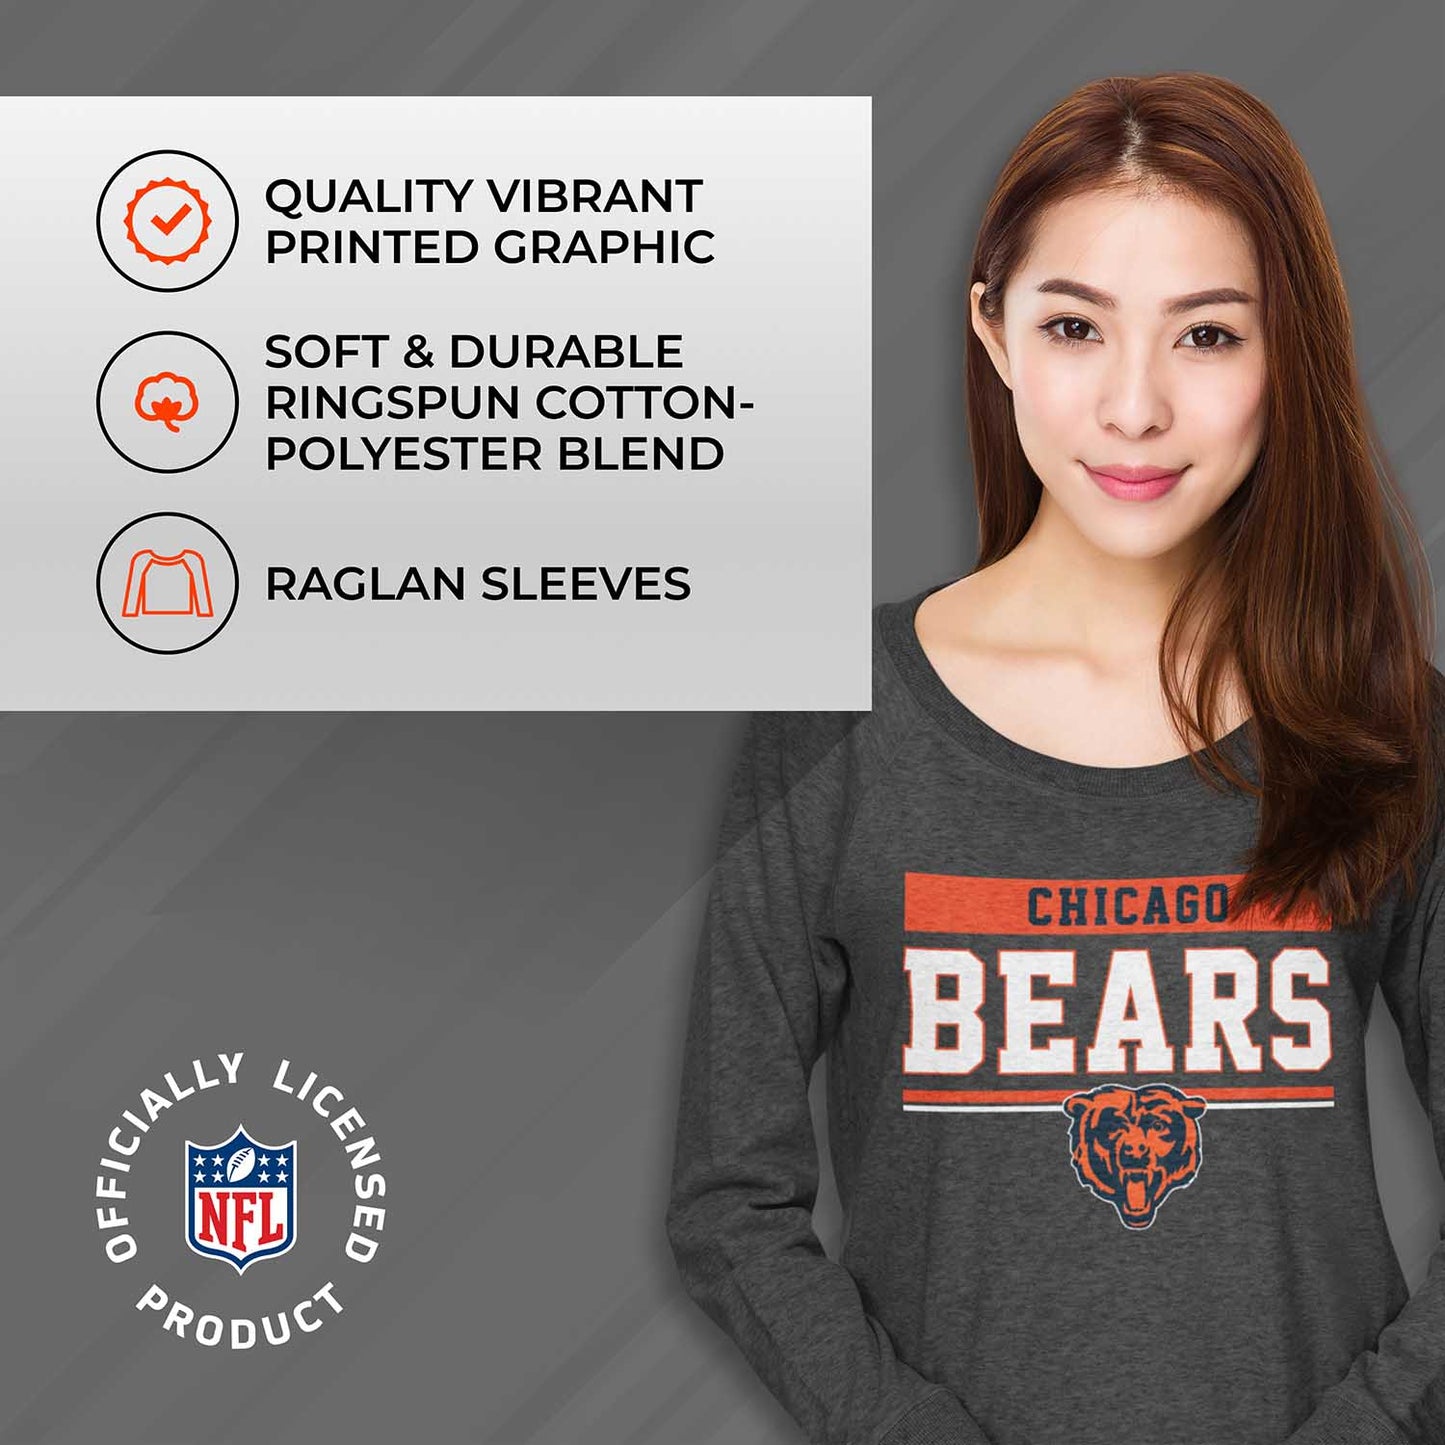 Chicago Bears NFL Womens Charcoal Crew Neck Football Apparel - Charcoal